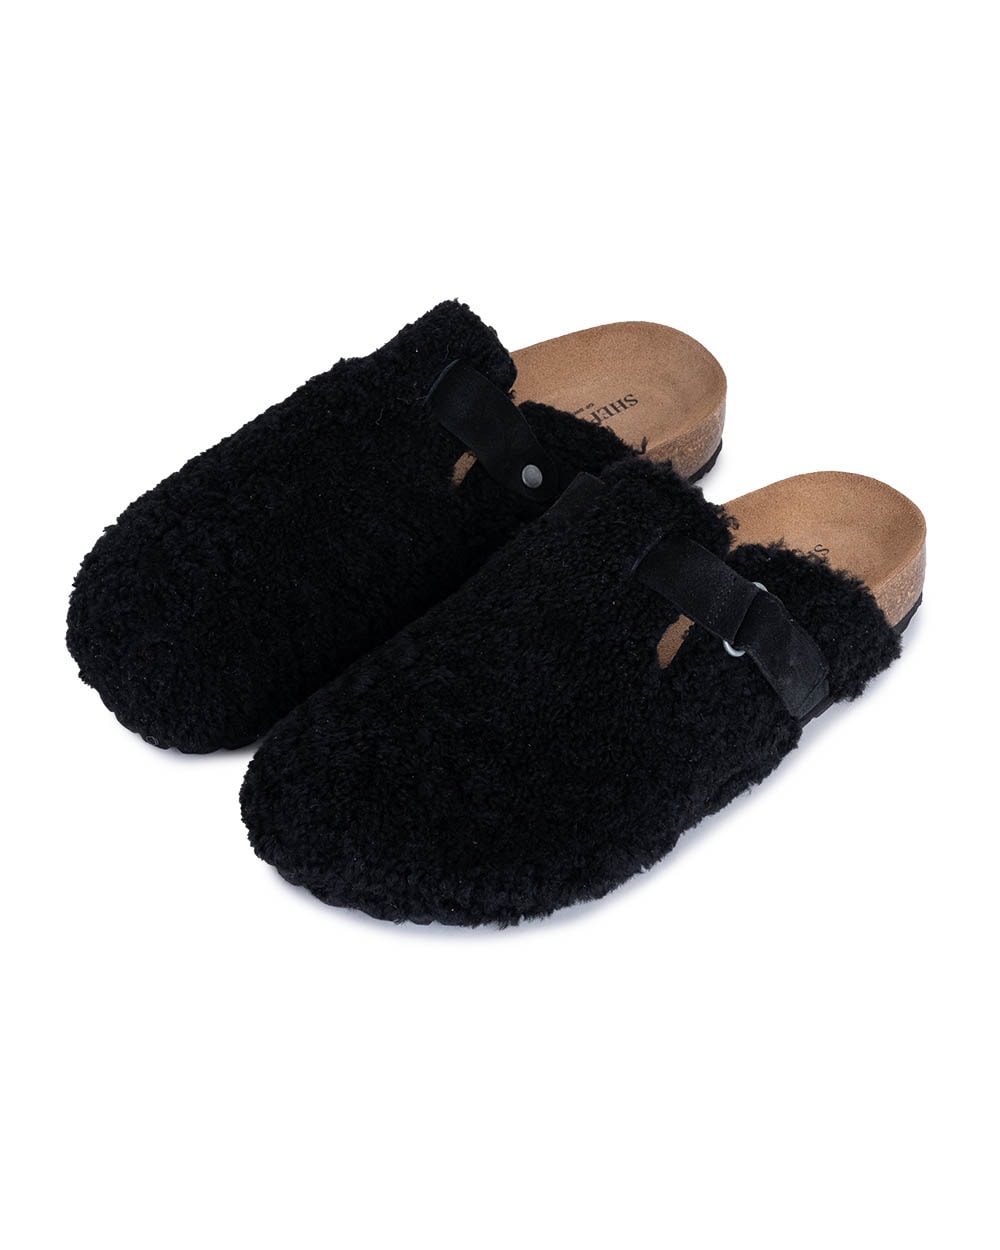 Roma slippers